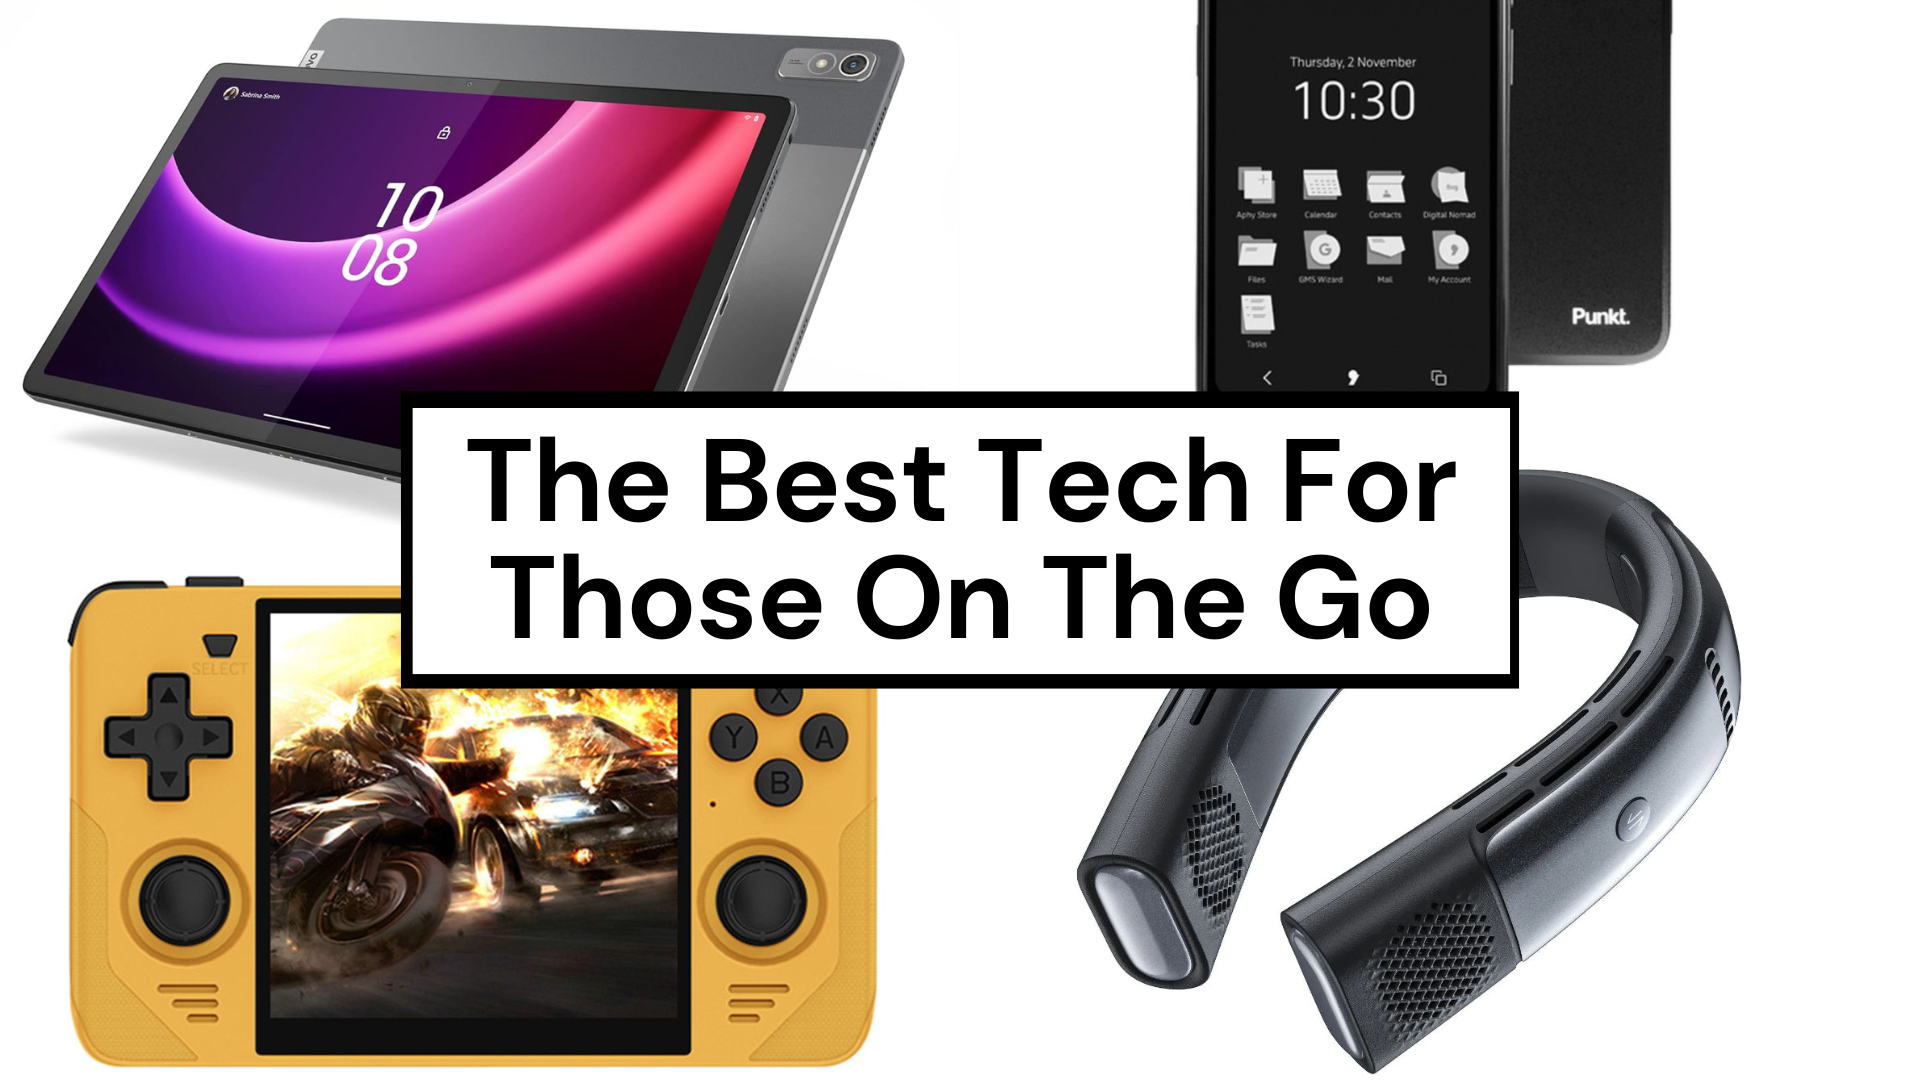 The Best Tech For Those On The Go